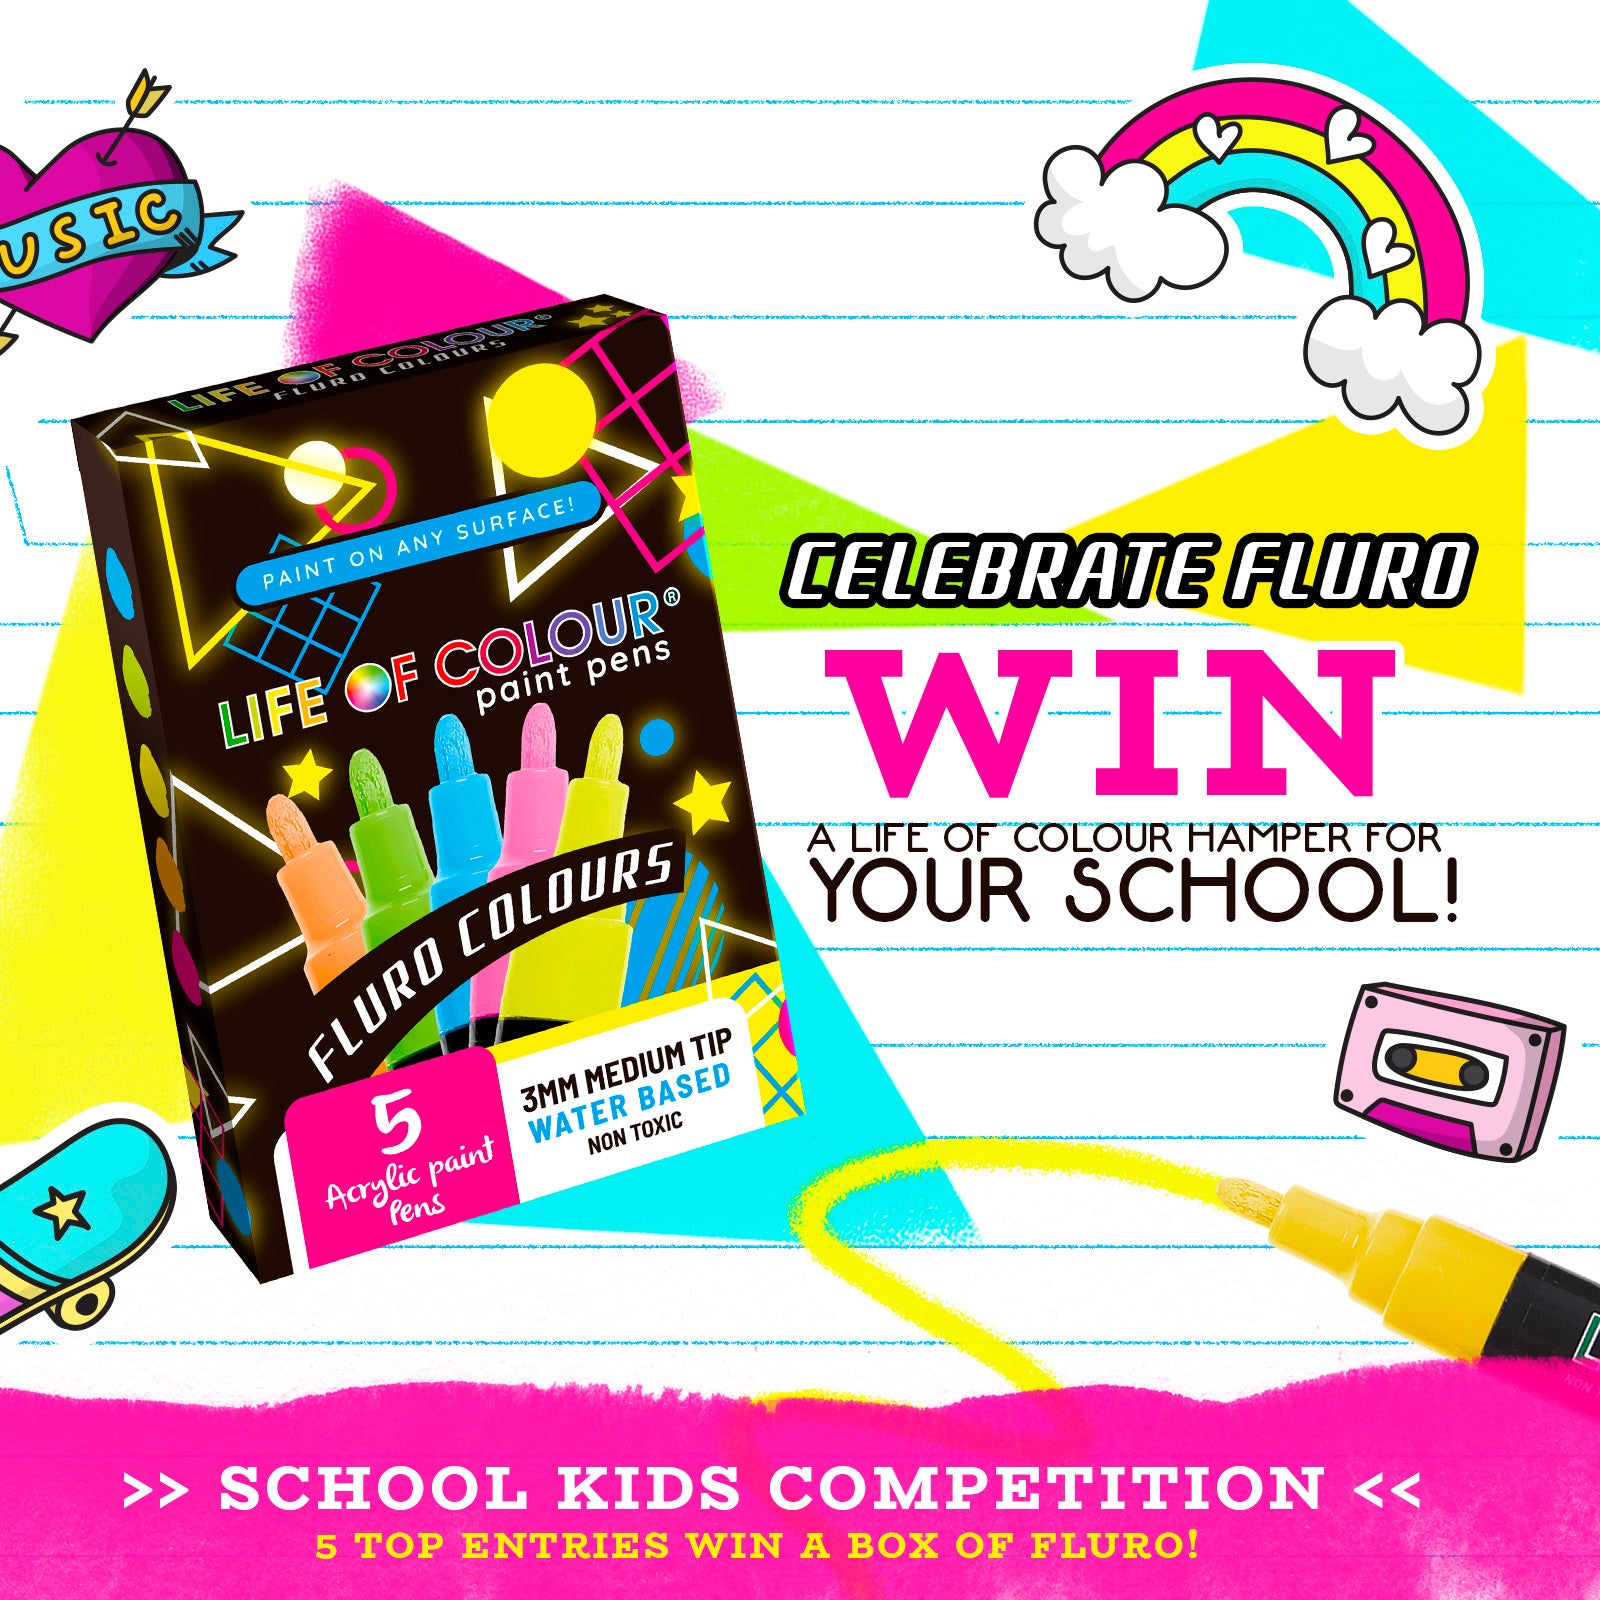 How to join our School Kids Competition - Celebrating Fluro!